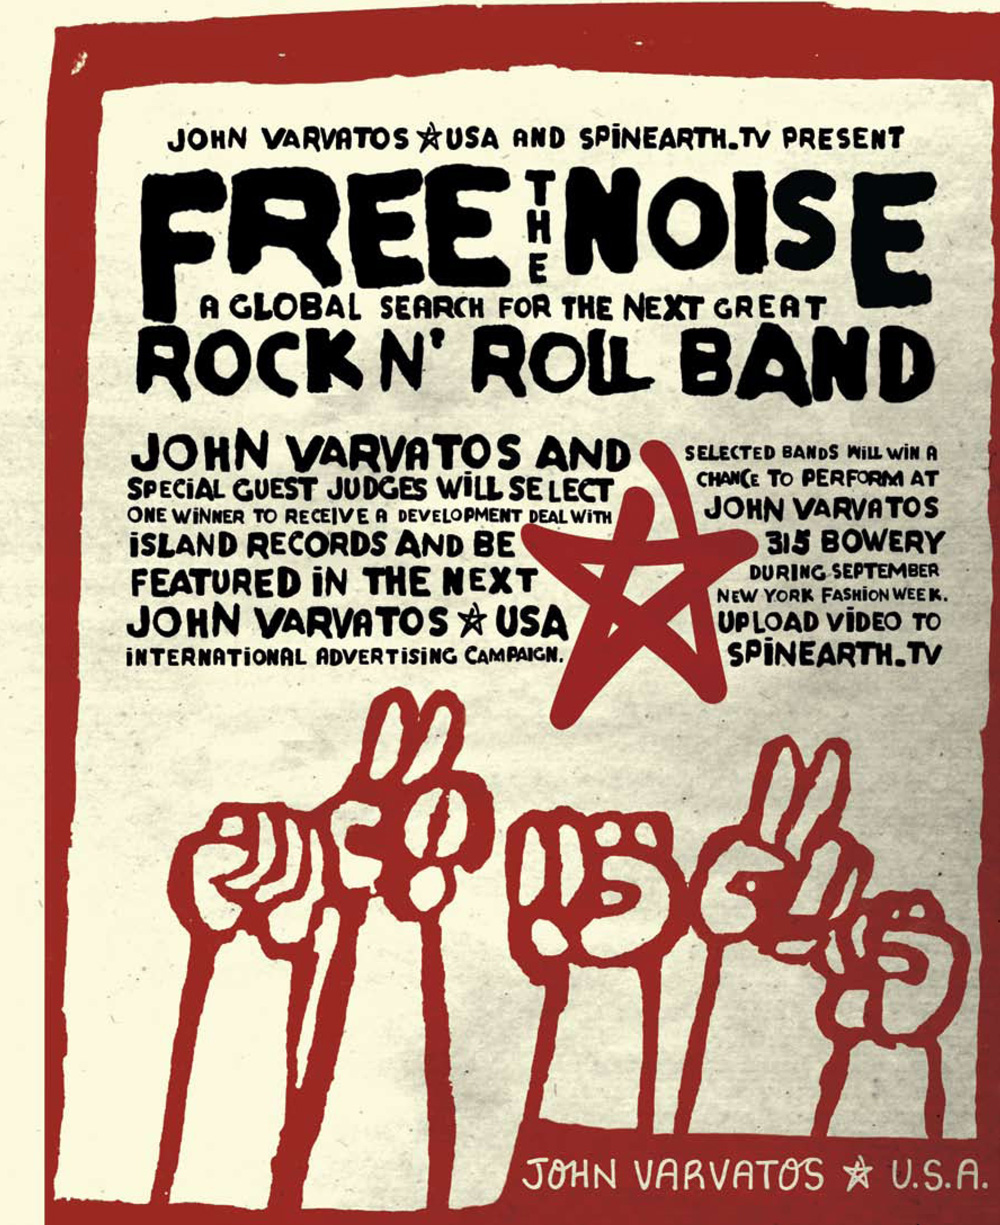 John Varvatos Rocks the World with ‘Free the Noise’ Band Competition